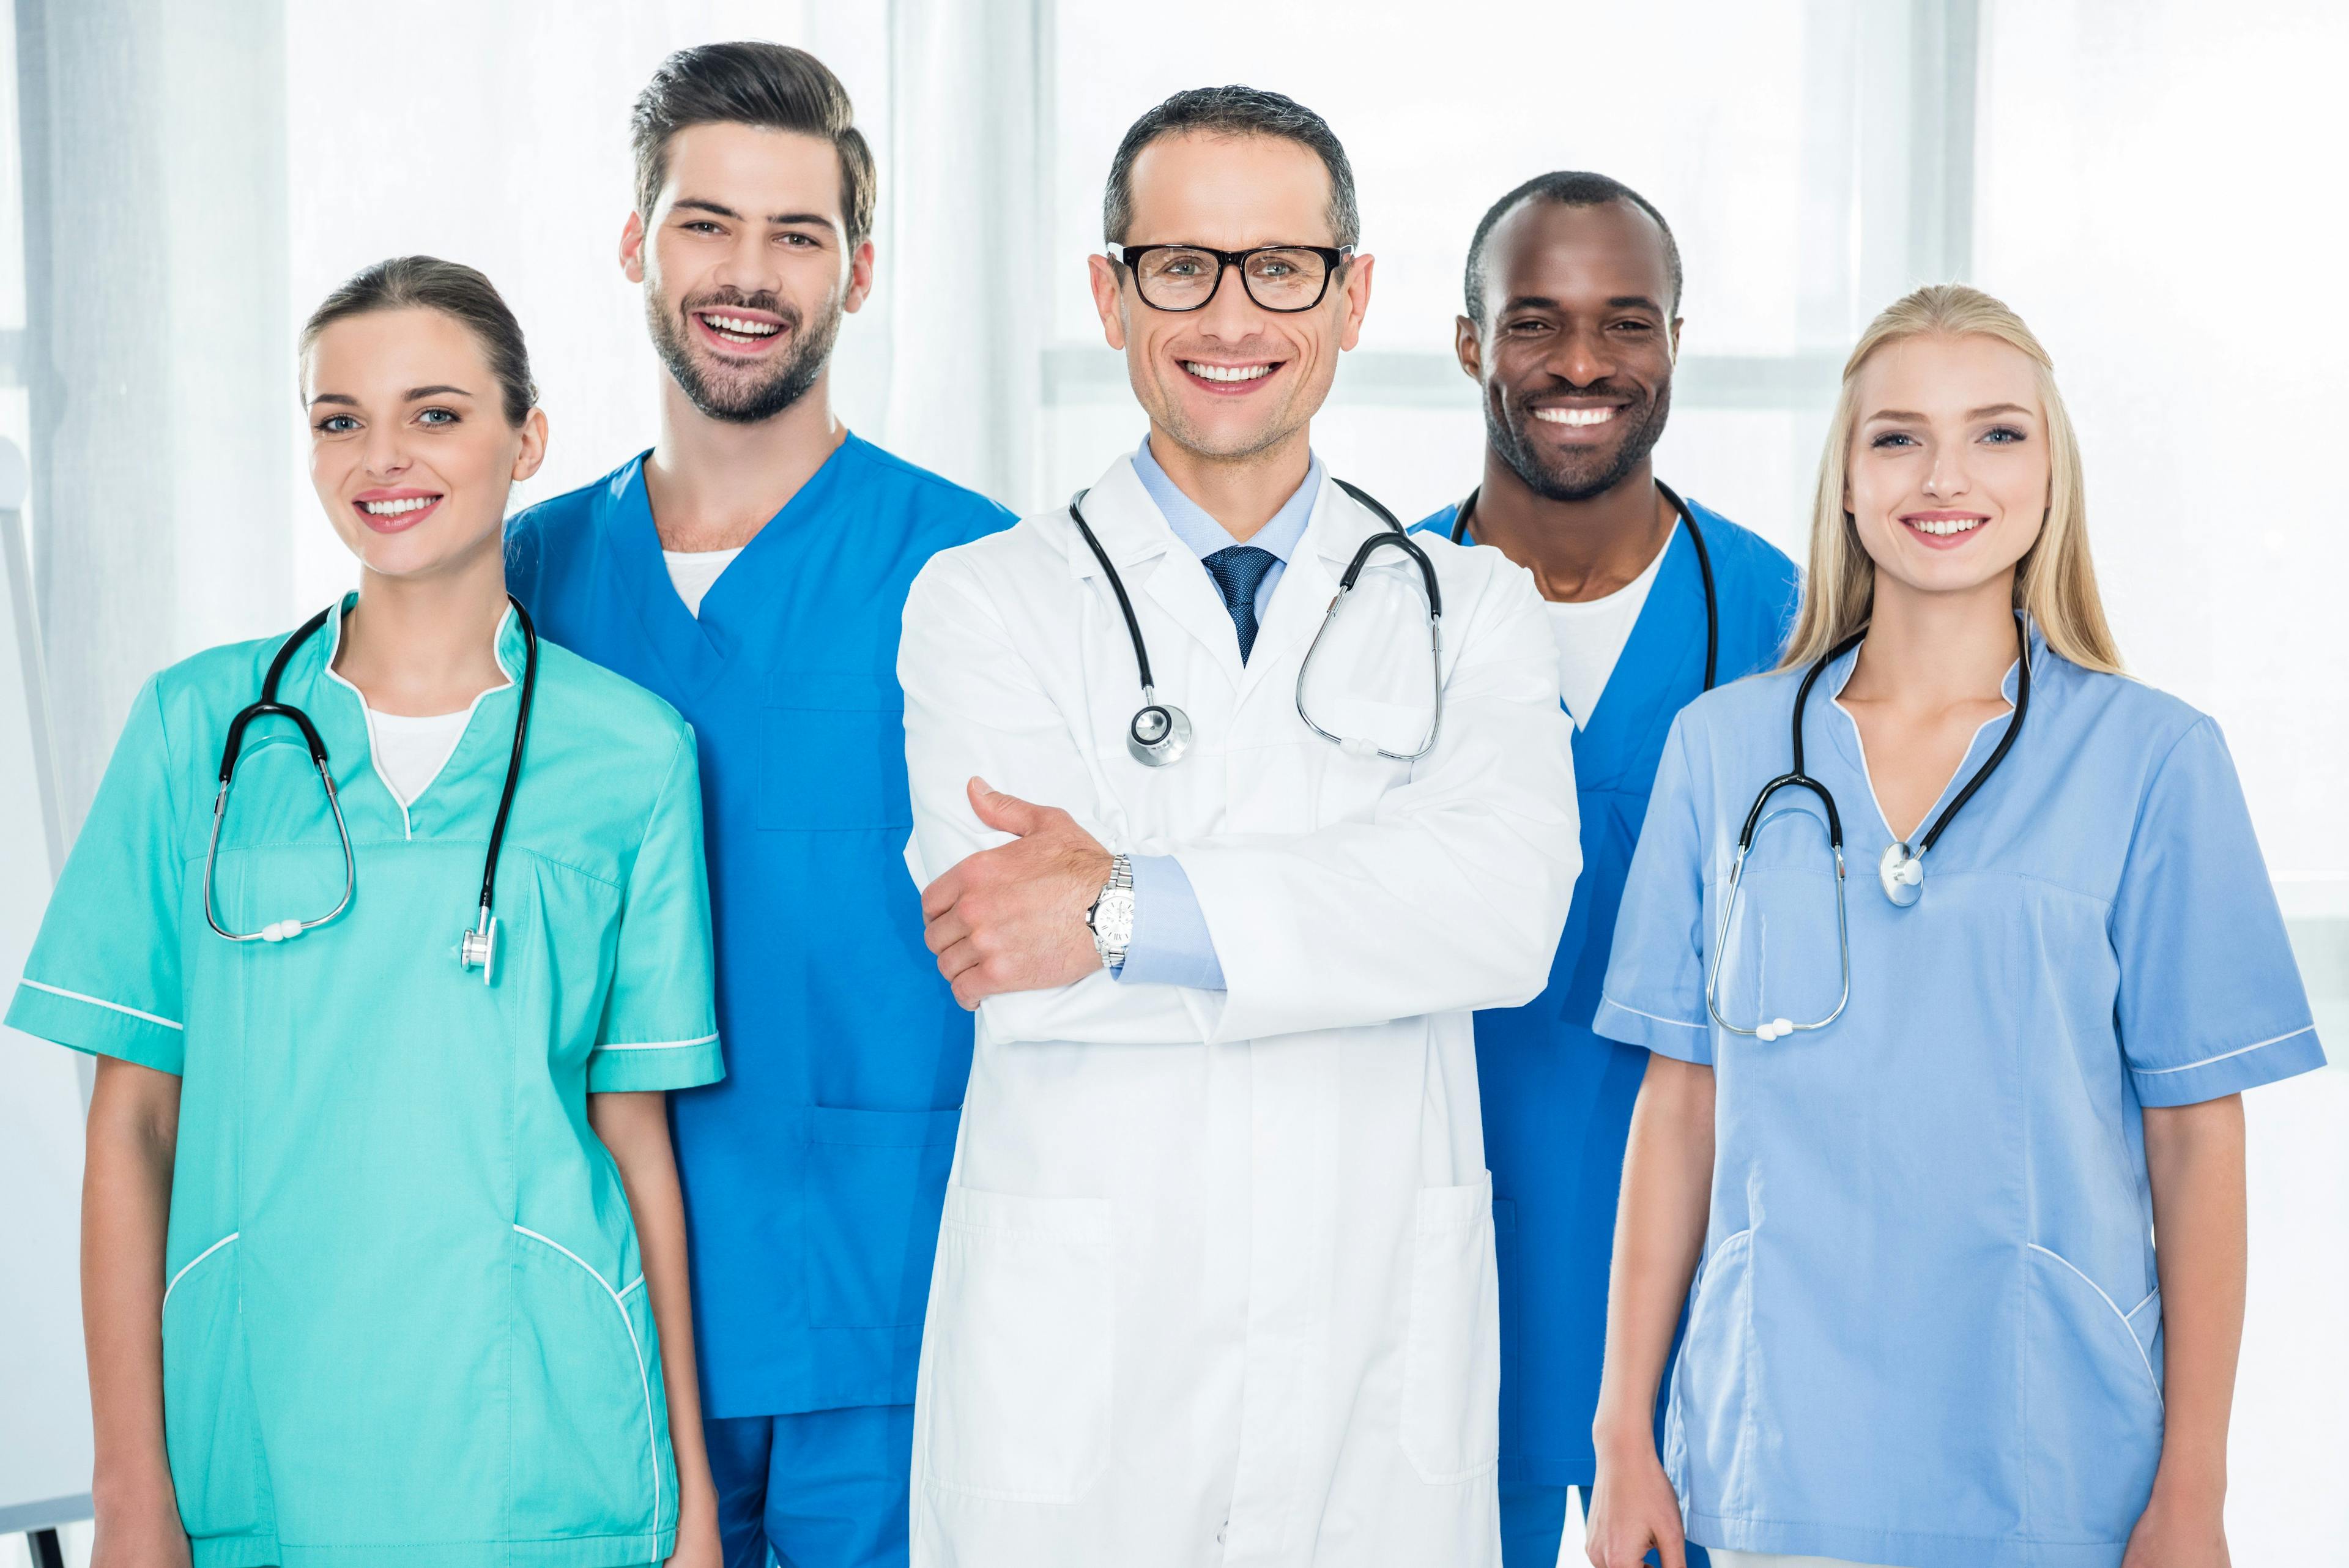 Association of American Medical Colleges, Physician Assistants, Certified PAs